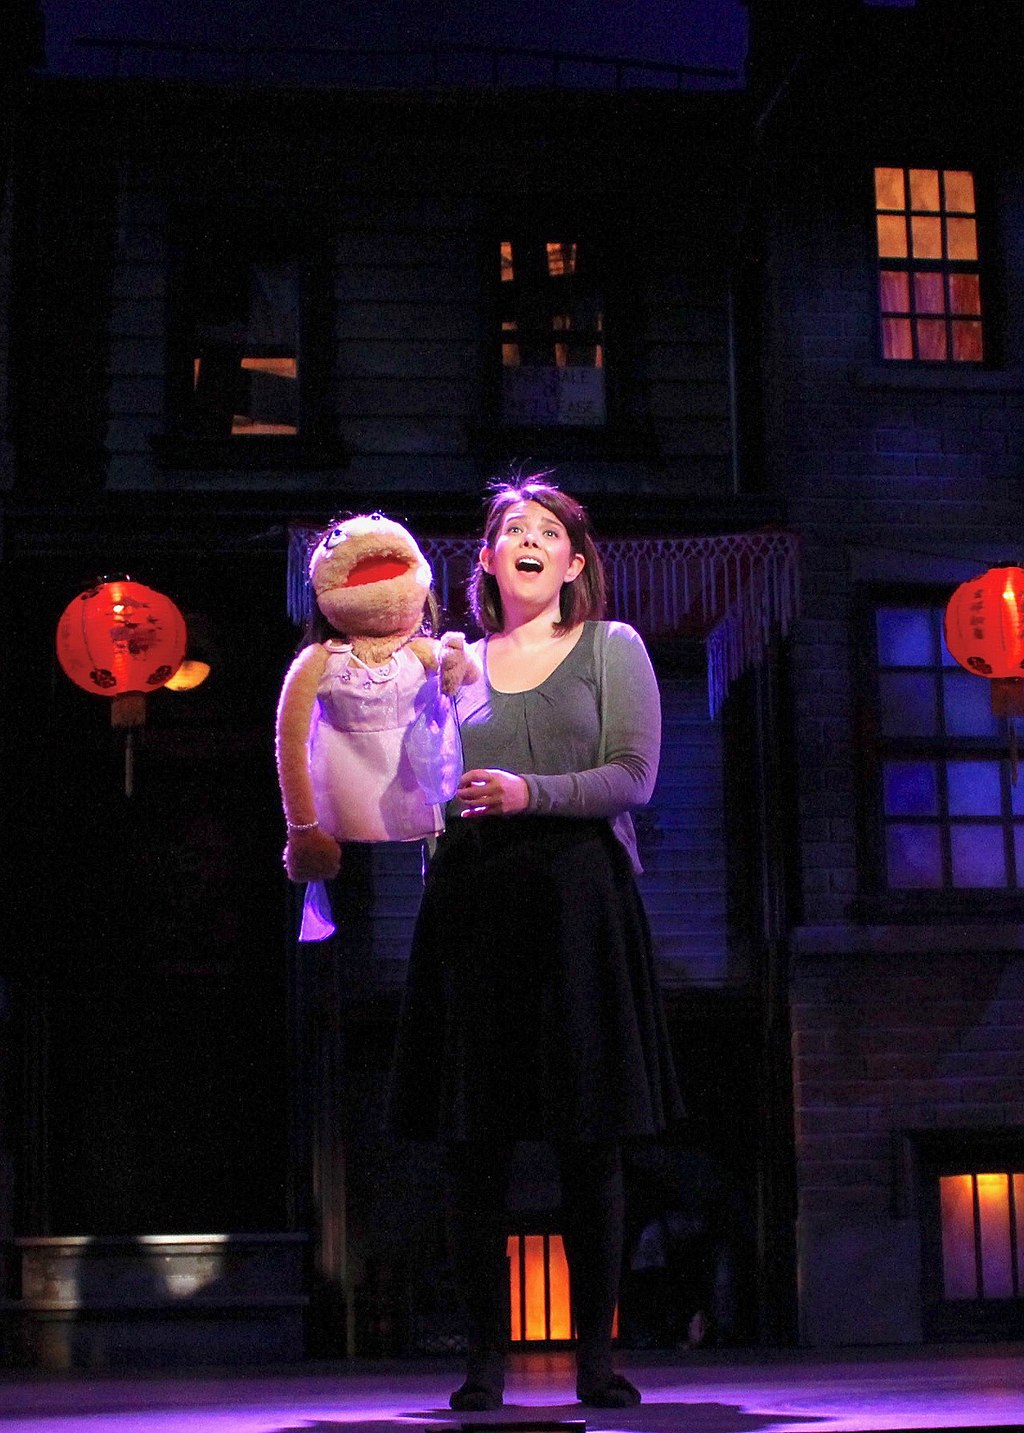 An actress performs with a puppet in front of a dark background.